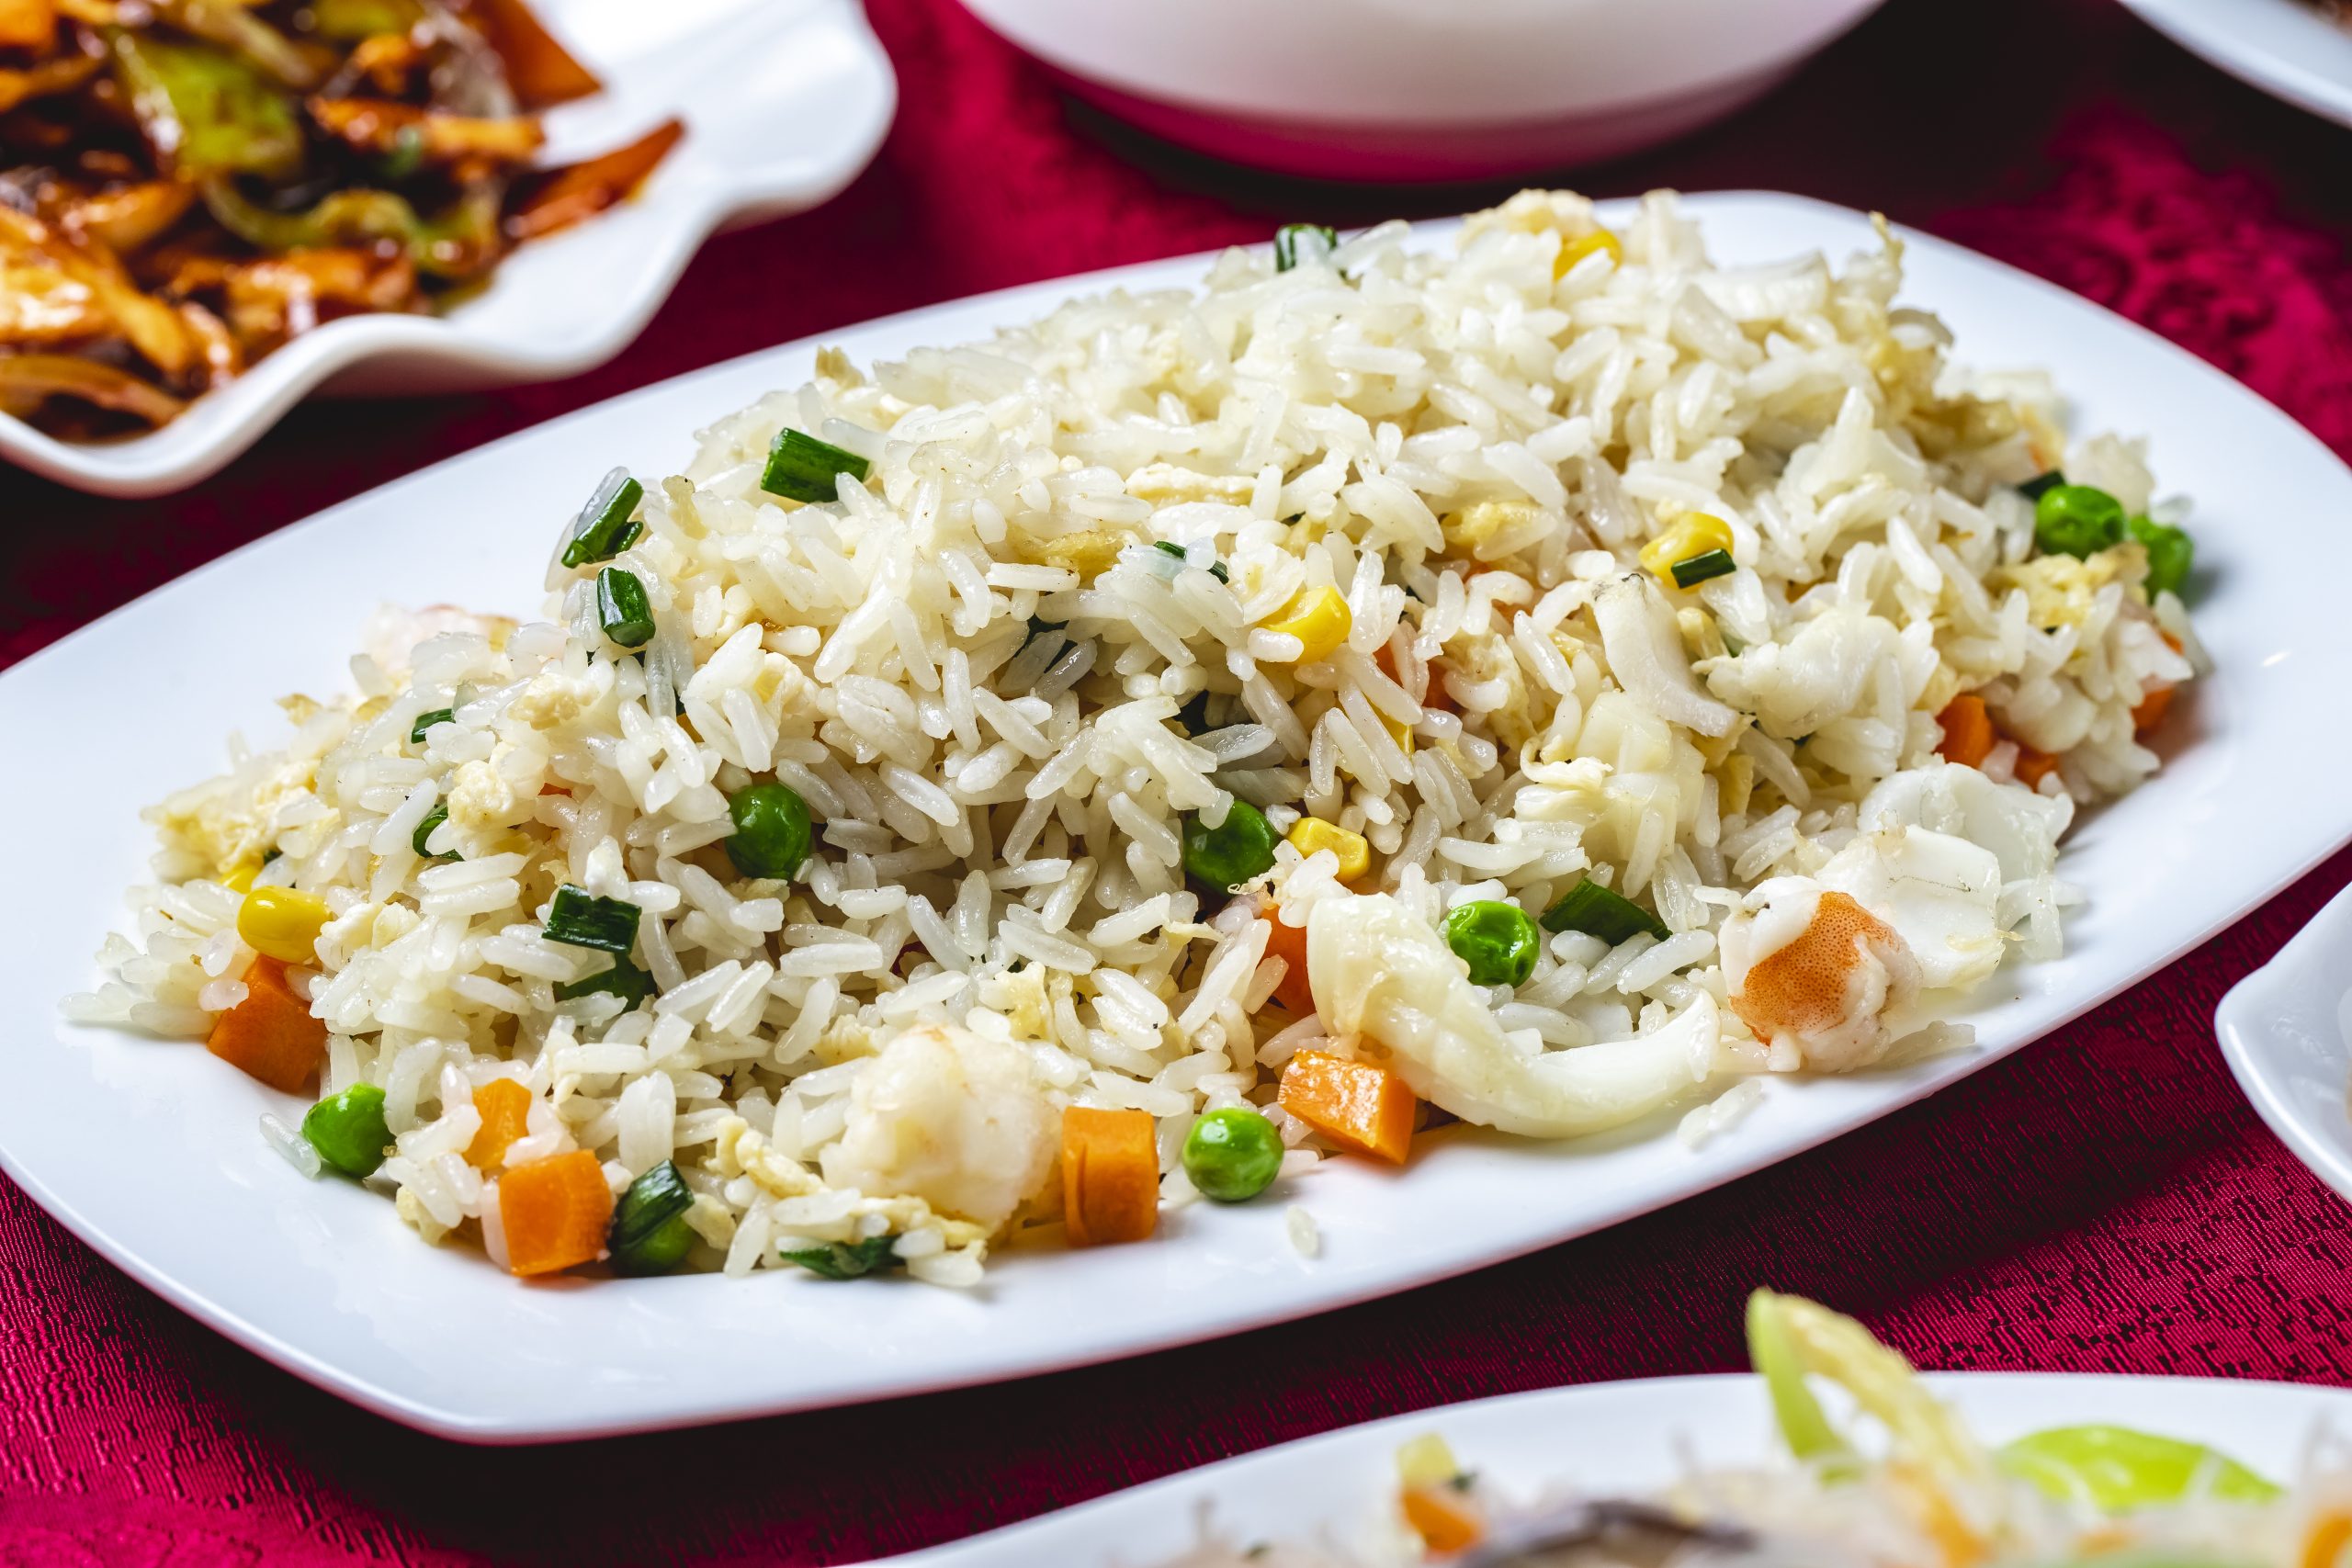 Why is Chicken and Rice Good for Weight Loss